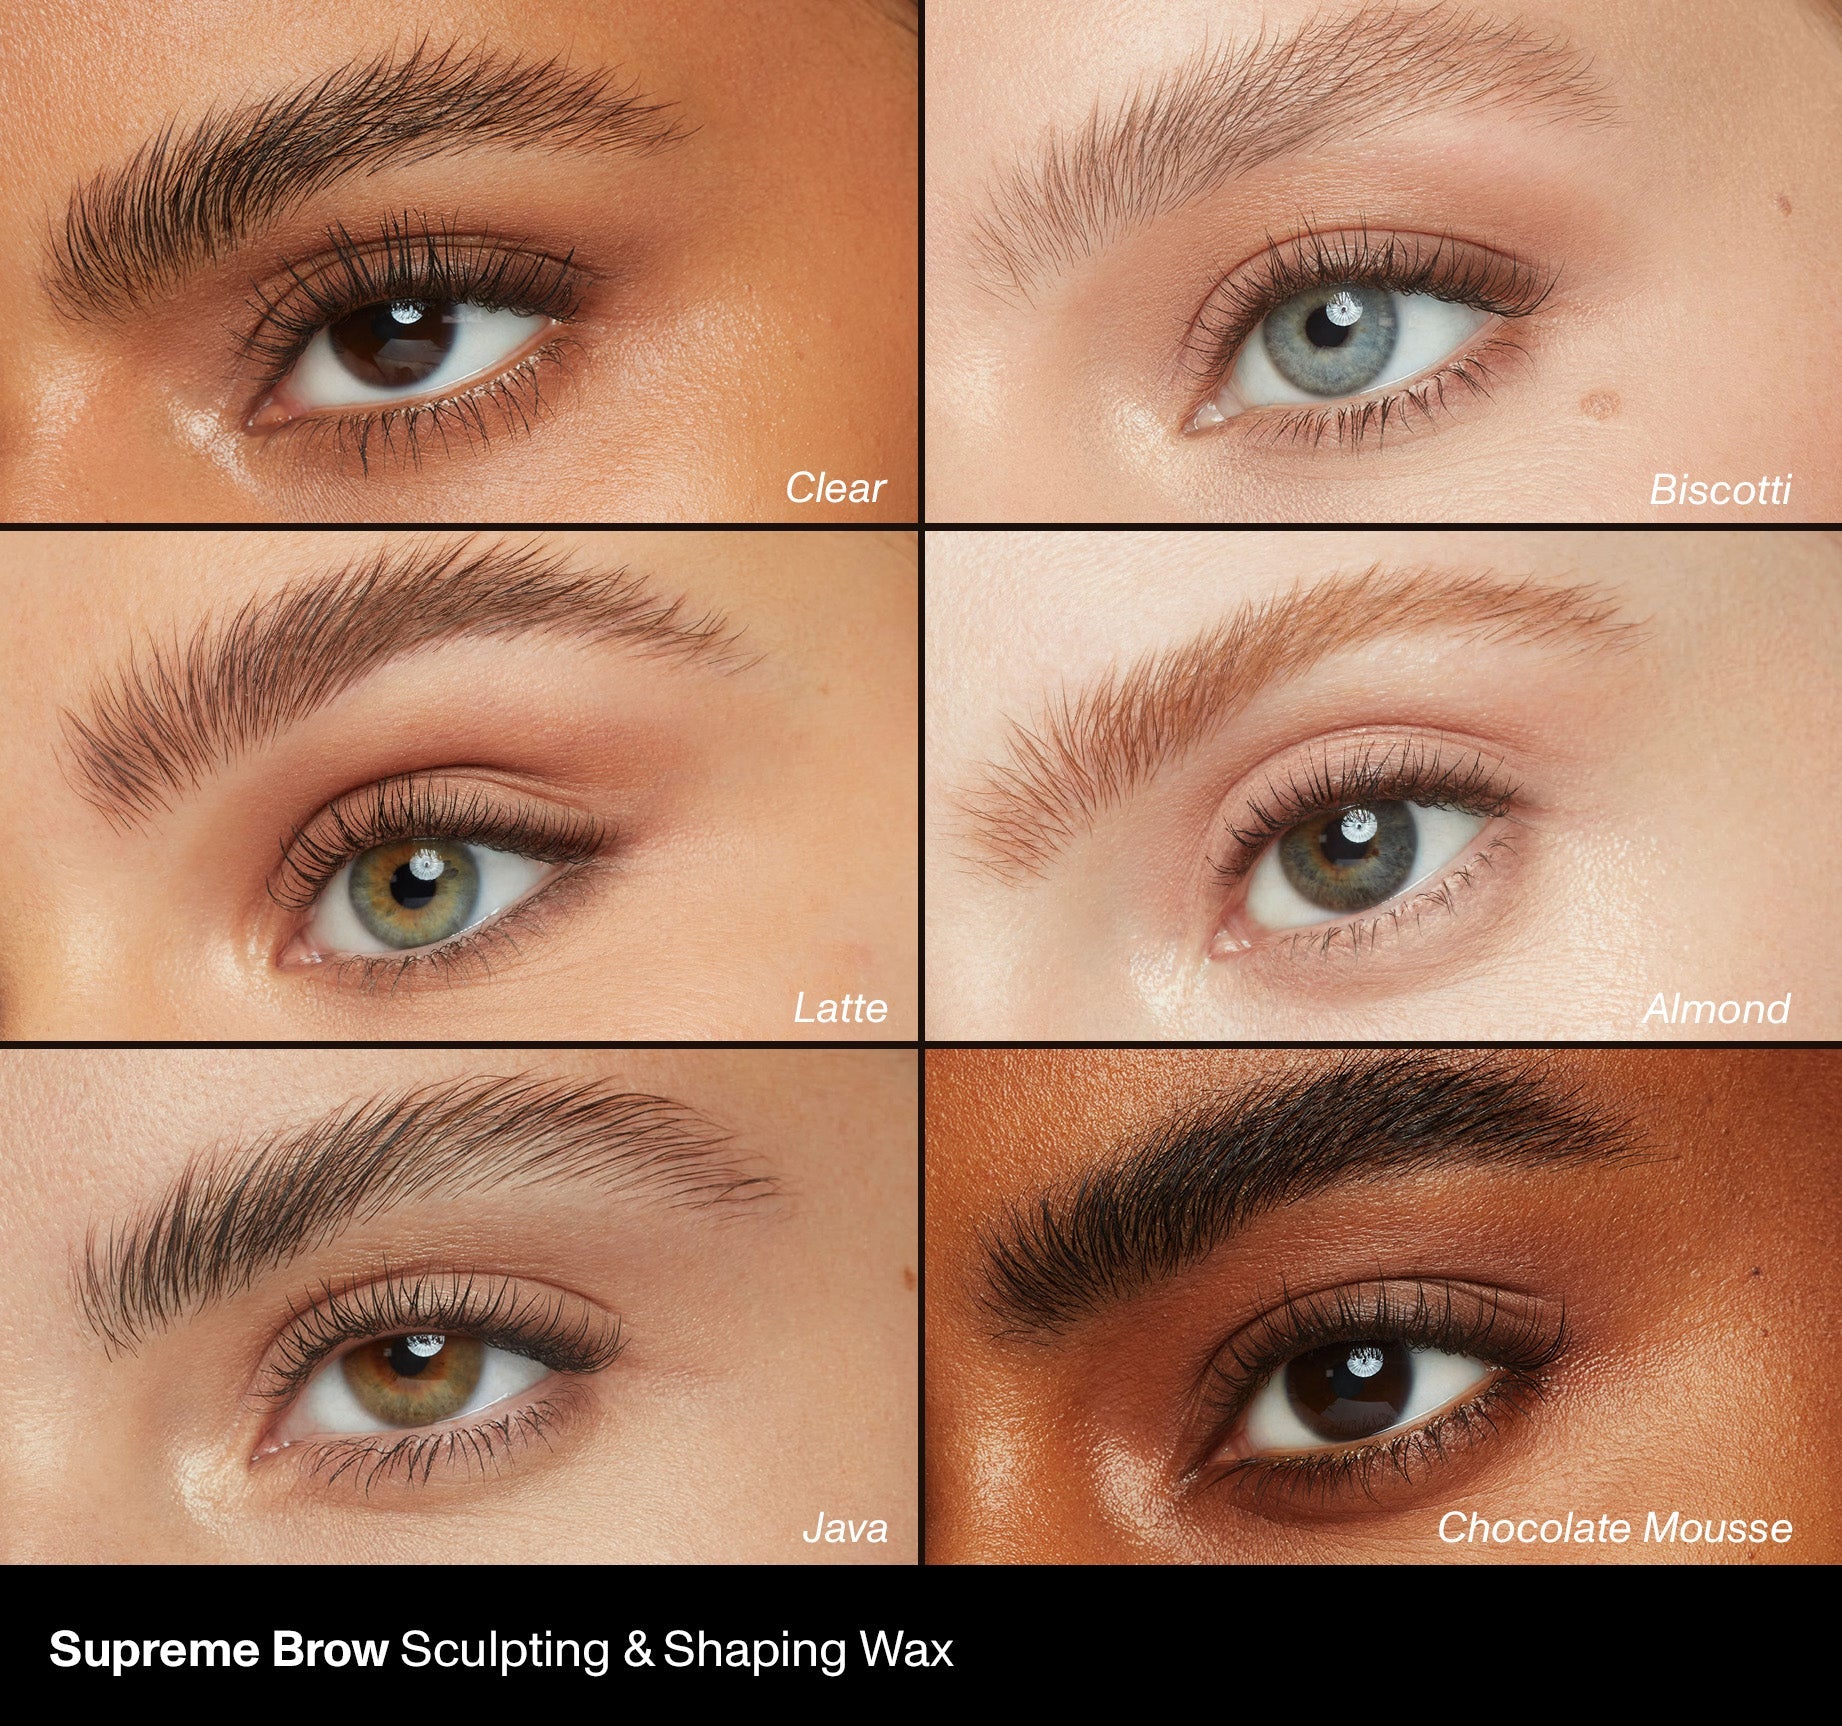 Supreme Brow Sculpting And Shaping Wax - Biscotti - Image 3